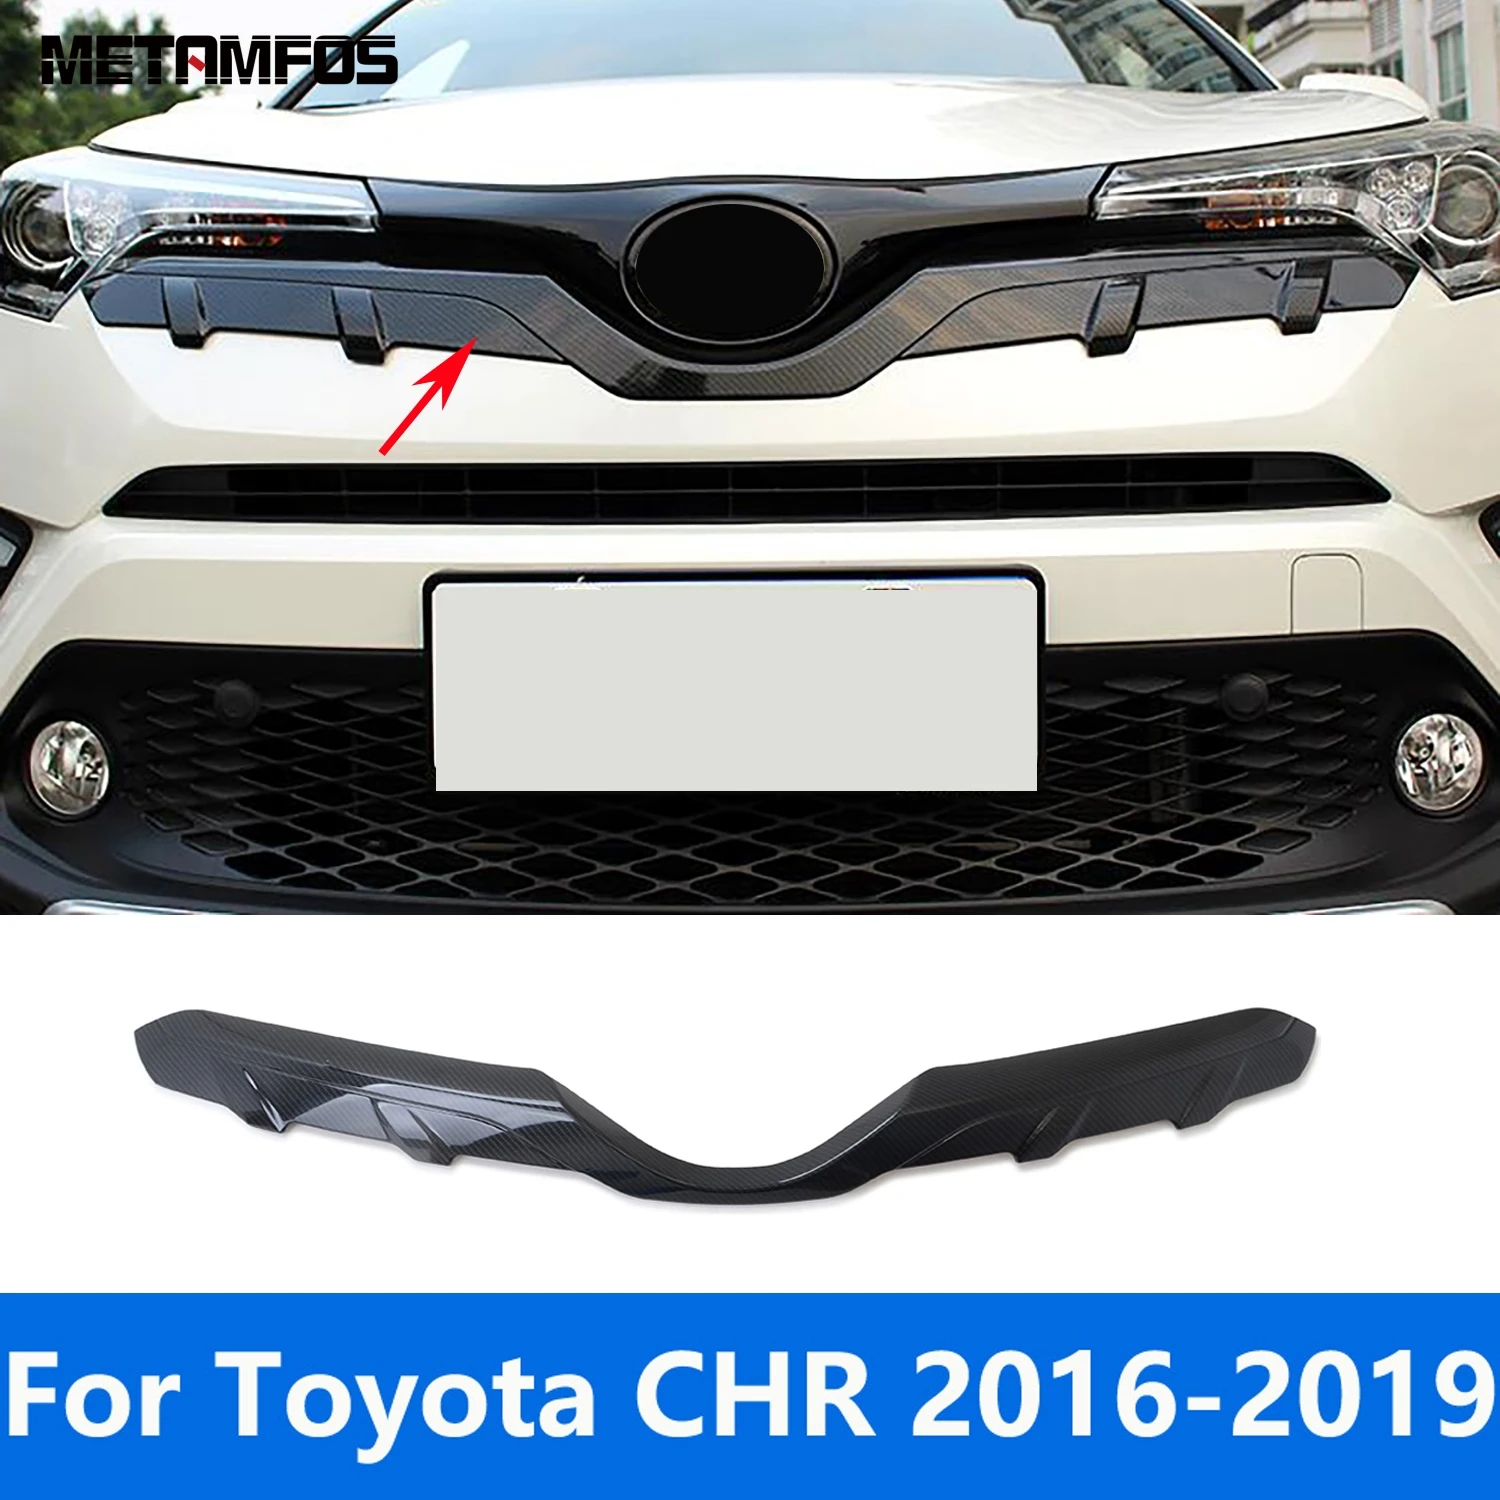 

For Toyota C-HR CHR 2016 2017 2018 2019 Carbon Fiber Front Engine Upper Grille Grill Strip Cover Trim Accessories Car Styling